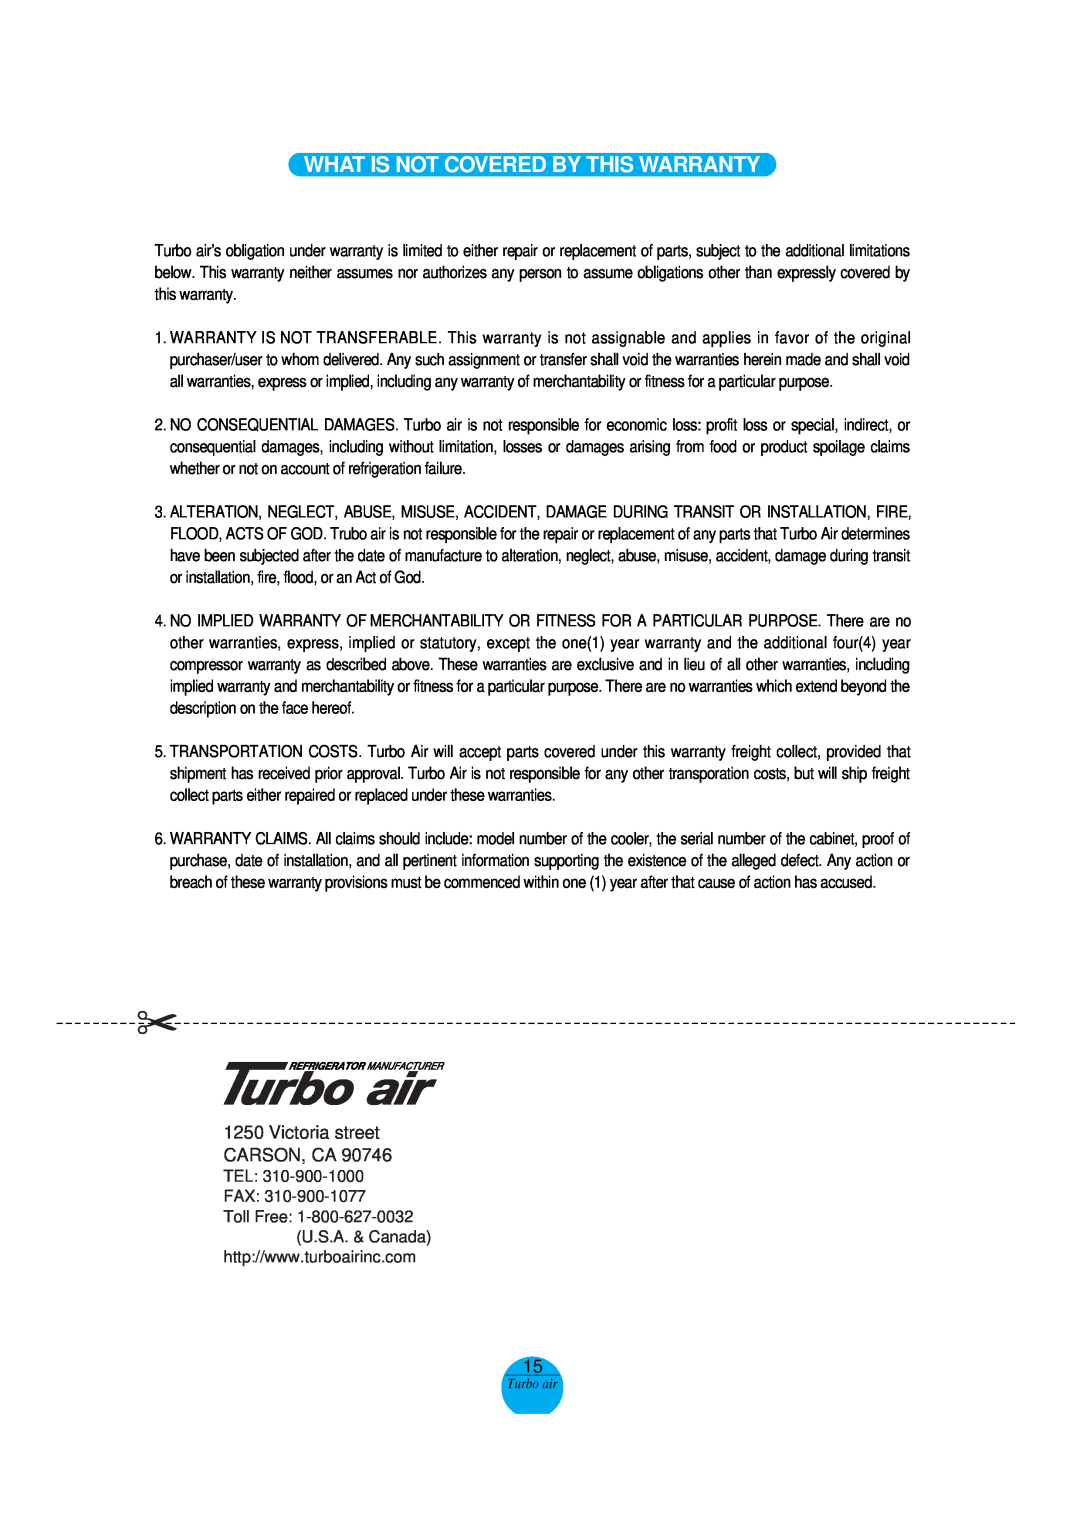 Turbo Air MSR-49NM, MSR-72G-3 operation manual What Is Not Covered By This Warranty, Victoria street CARSON, CA, Tel: Fax 